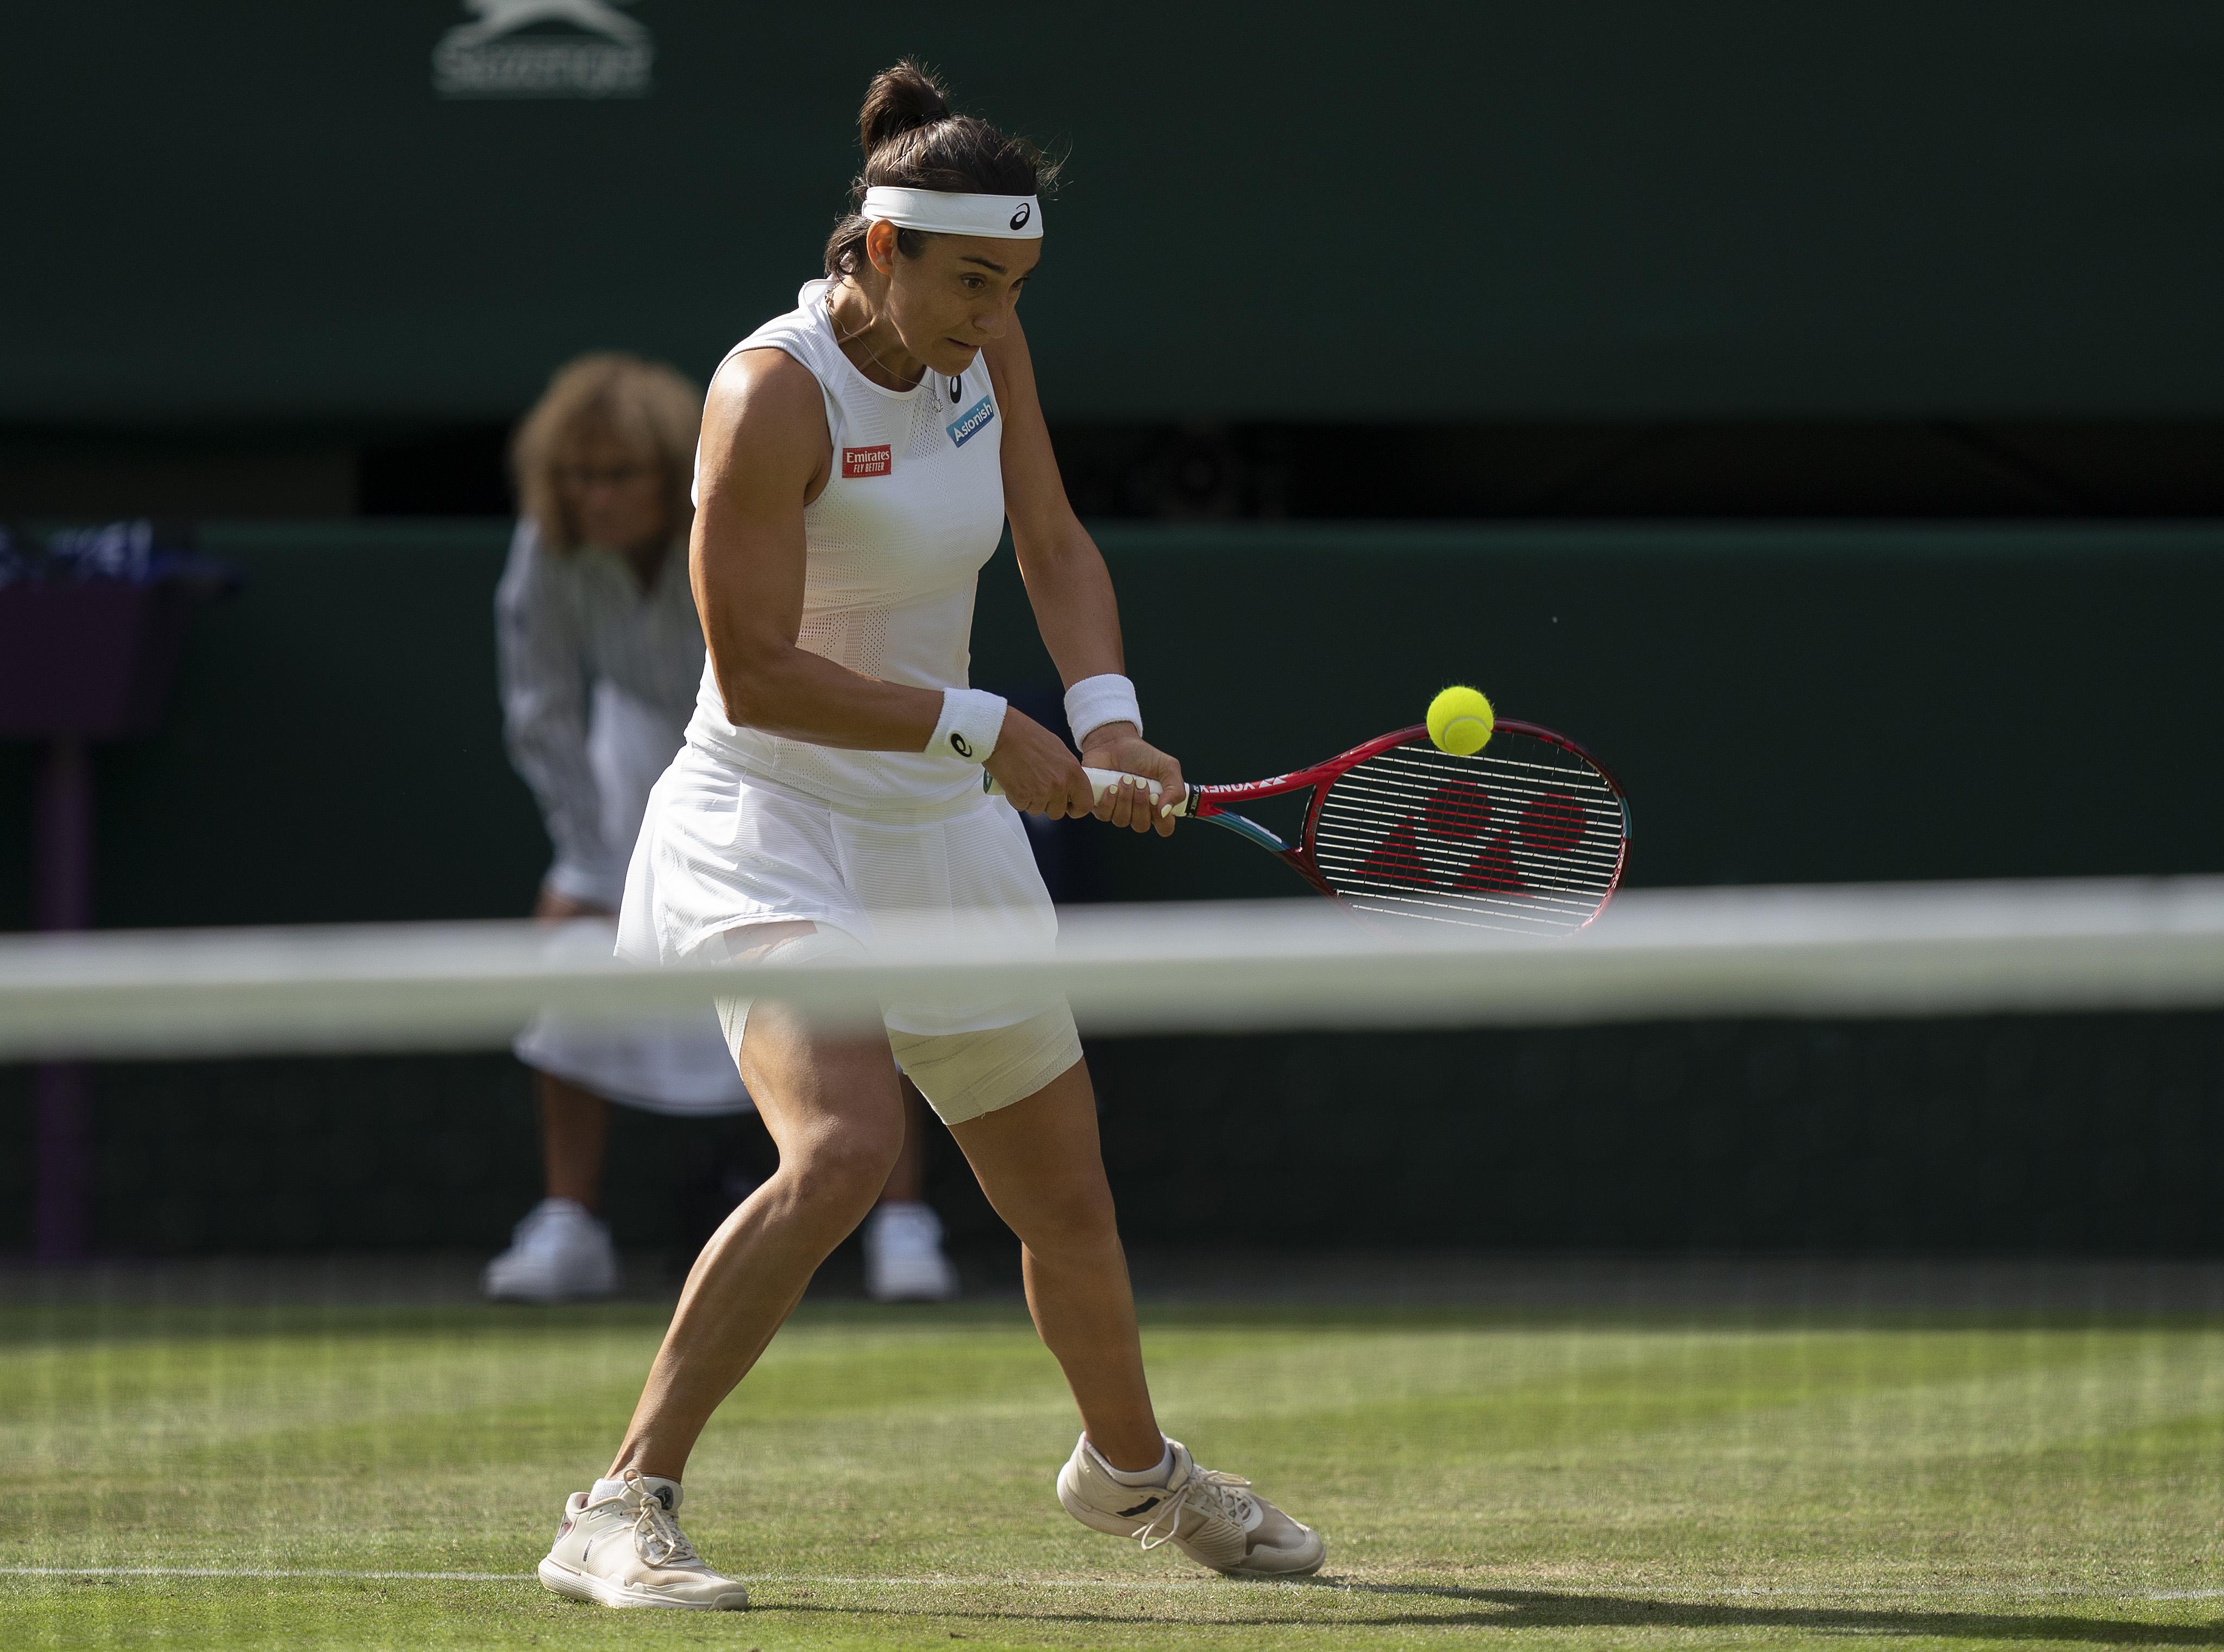 Marie Bouzková vs Caroline Garcia Odds, Prediction and Betting Trends for 2022 Wimbledon Women's Round of 16 Match